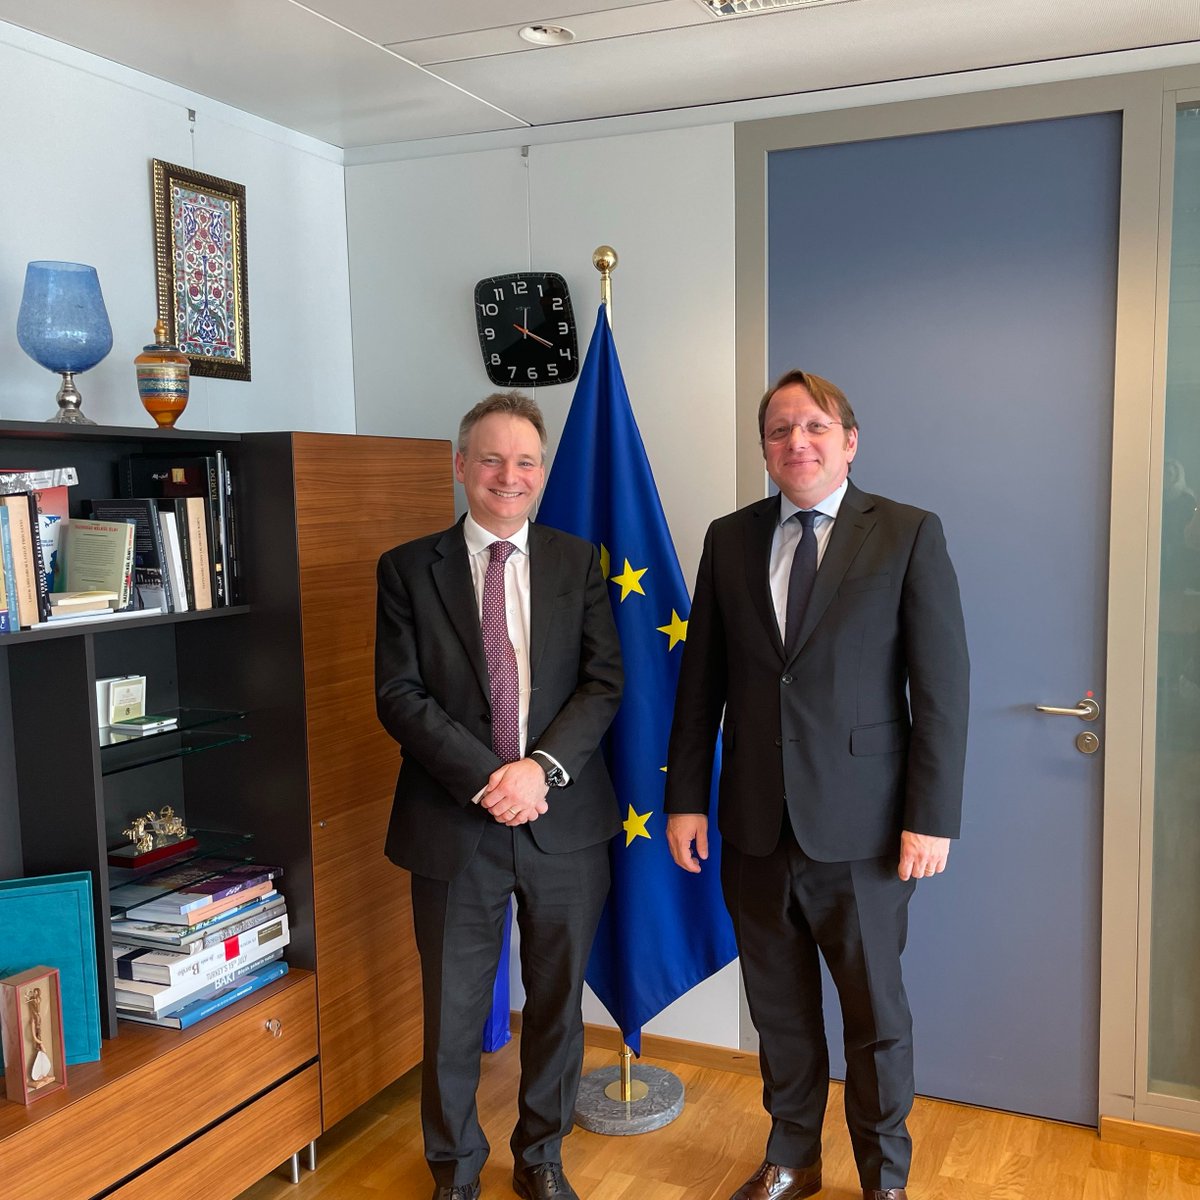 Good to meet 🤝 Commissioner @OliverVarhelyi today! Our fruitful discussion centred around 🇬🇧-🇪🇺 cooperation on Ukraine, Israel/Gaza and the Western Balkans.